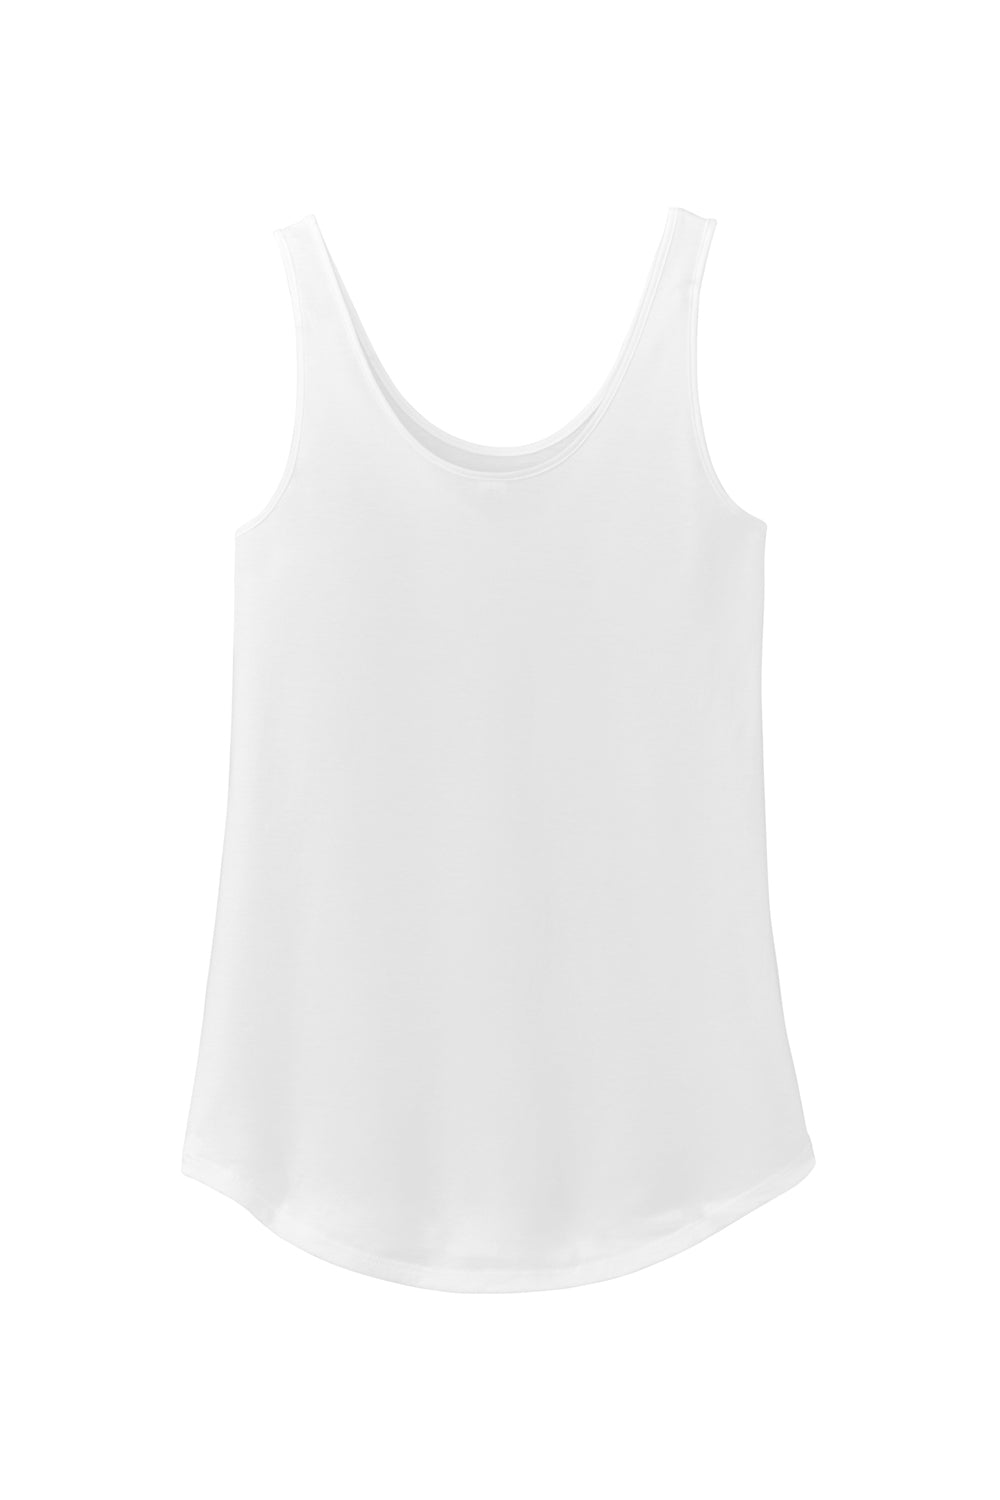 District DT151 Womens Perfect Tri Relaxed Tank Top White Flat Back